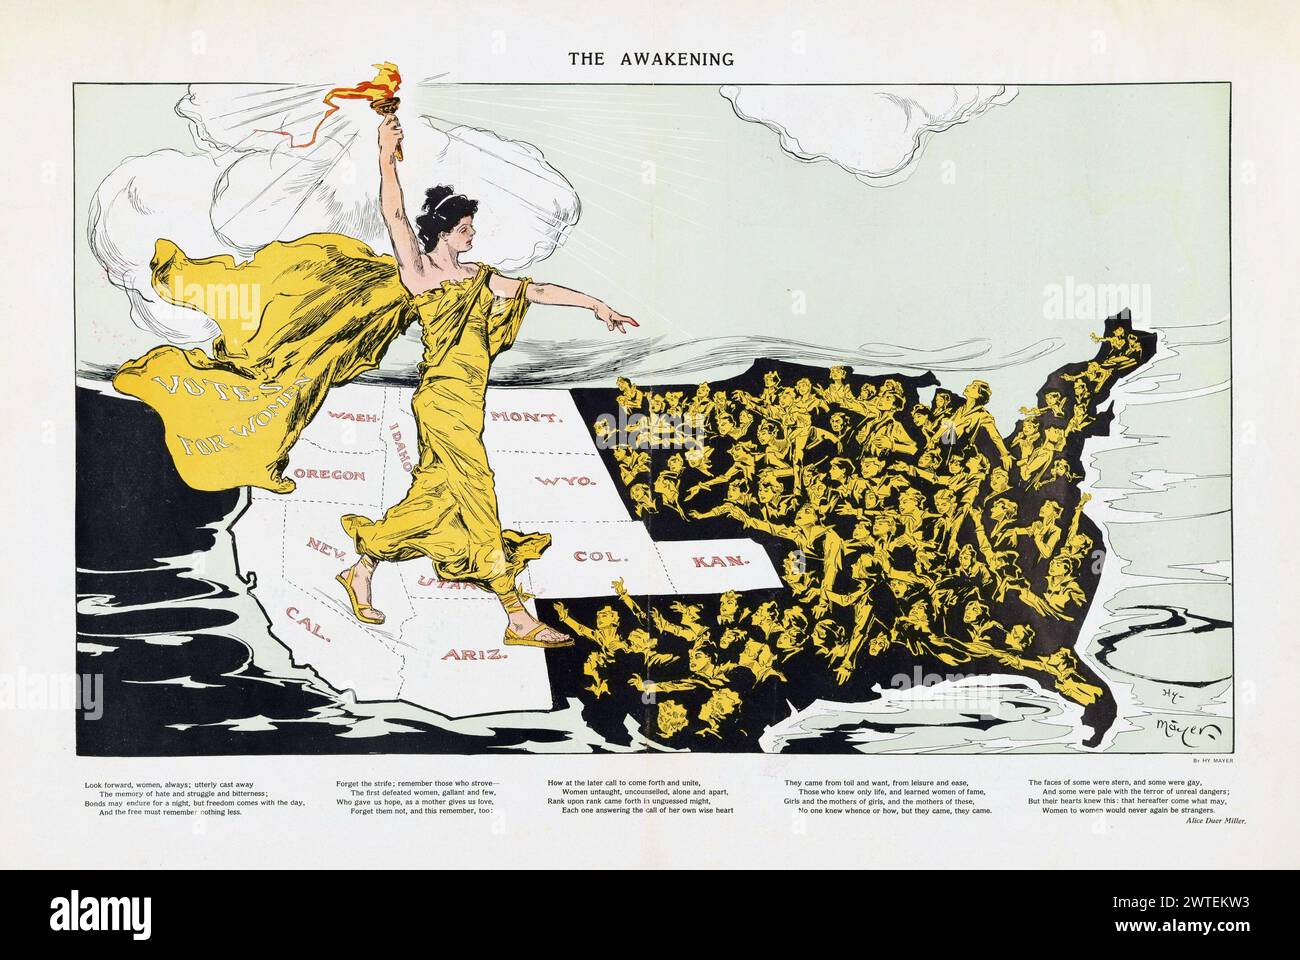 'The Awakening' by Henry Mayer published in the American magazine Puck 20 February 1915 .   Political cartoon,  with torch-bearing female labeled 'Votes for Women',  the awakening of the nation's women to the desire for suffrage as the American Suffragette movement sweeps across country, moving from West to East. Stock Photo